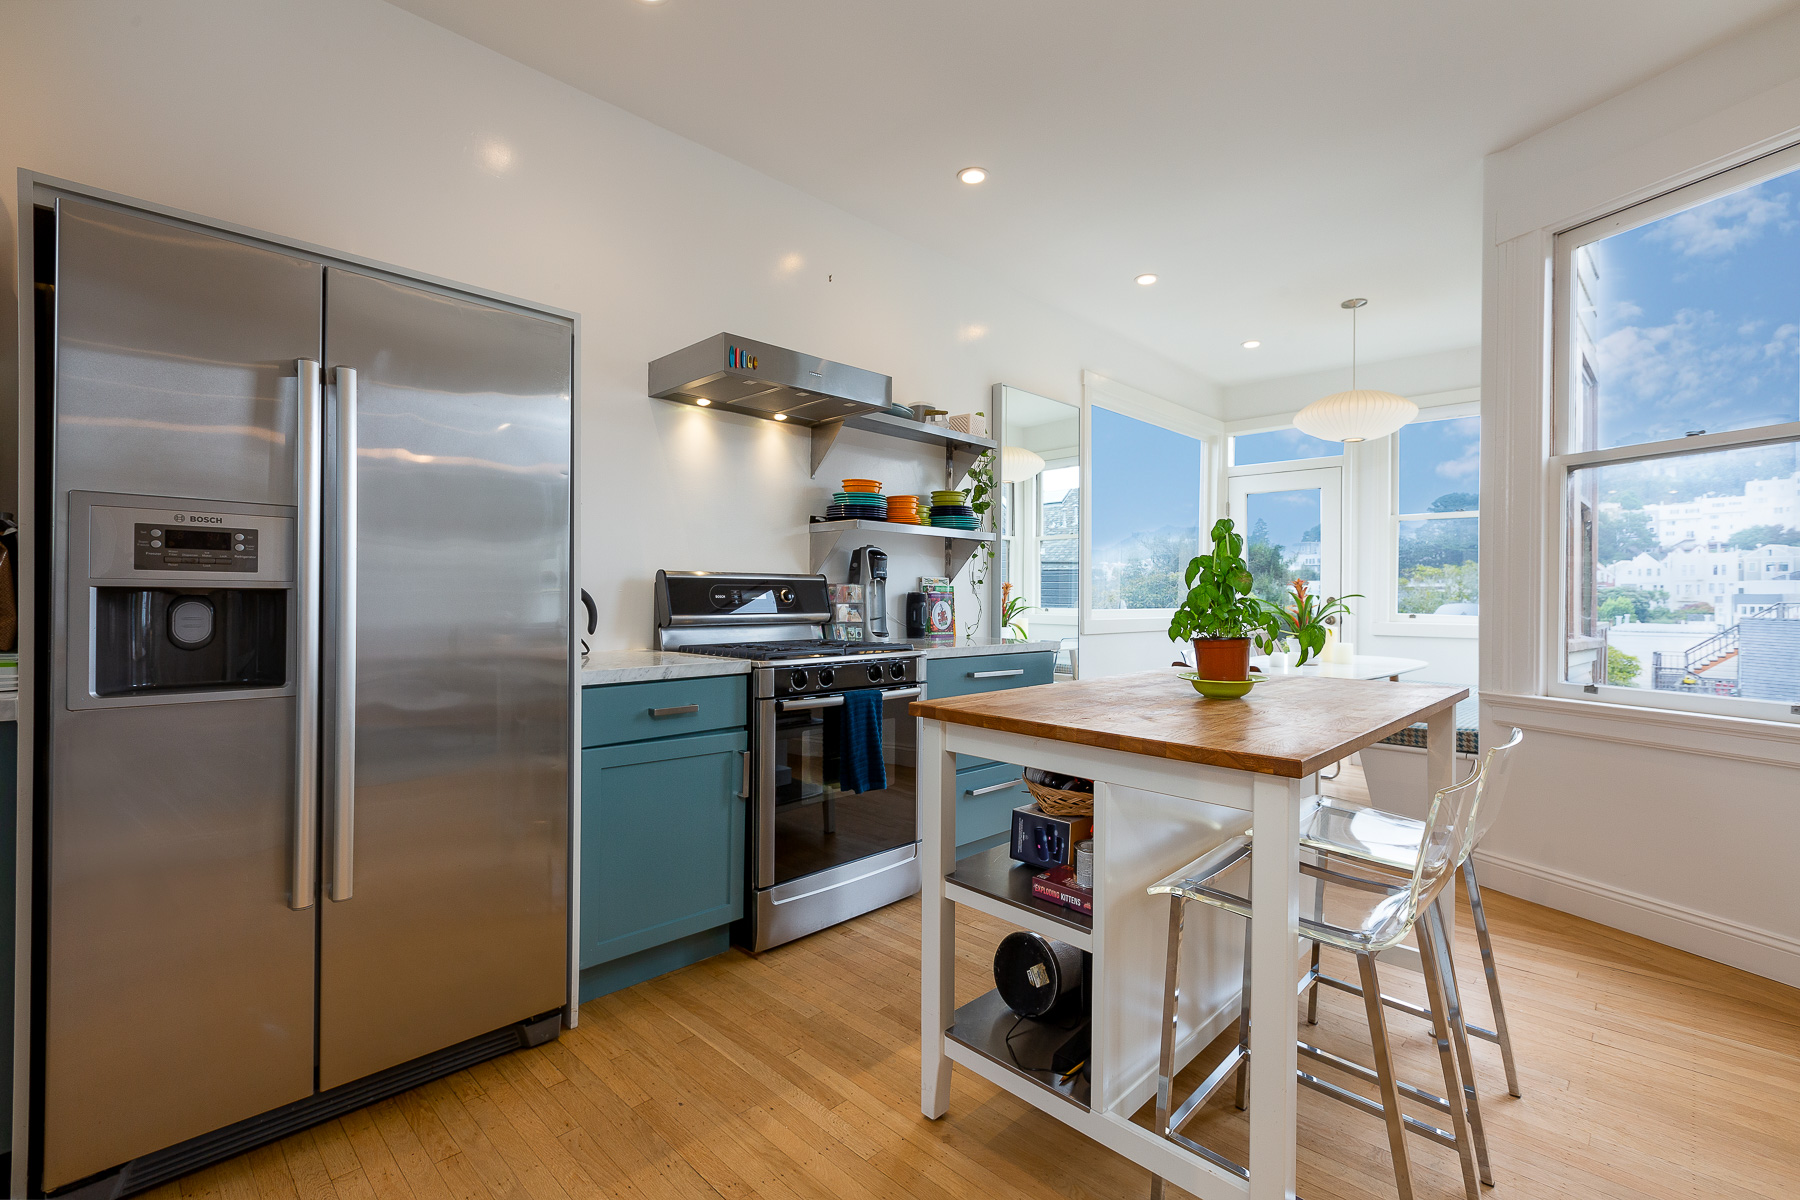 Property Photo: Kitchen featuring wood floors and stainless steel appliances 